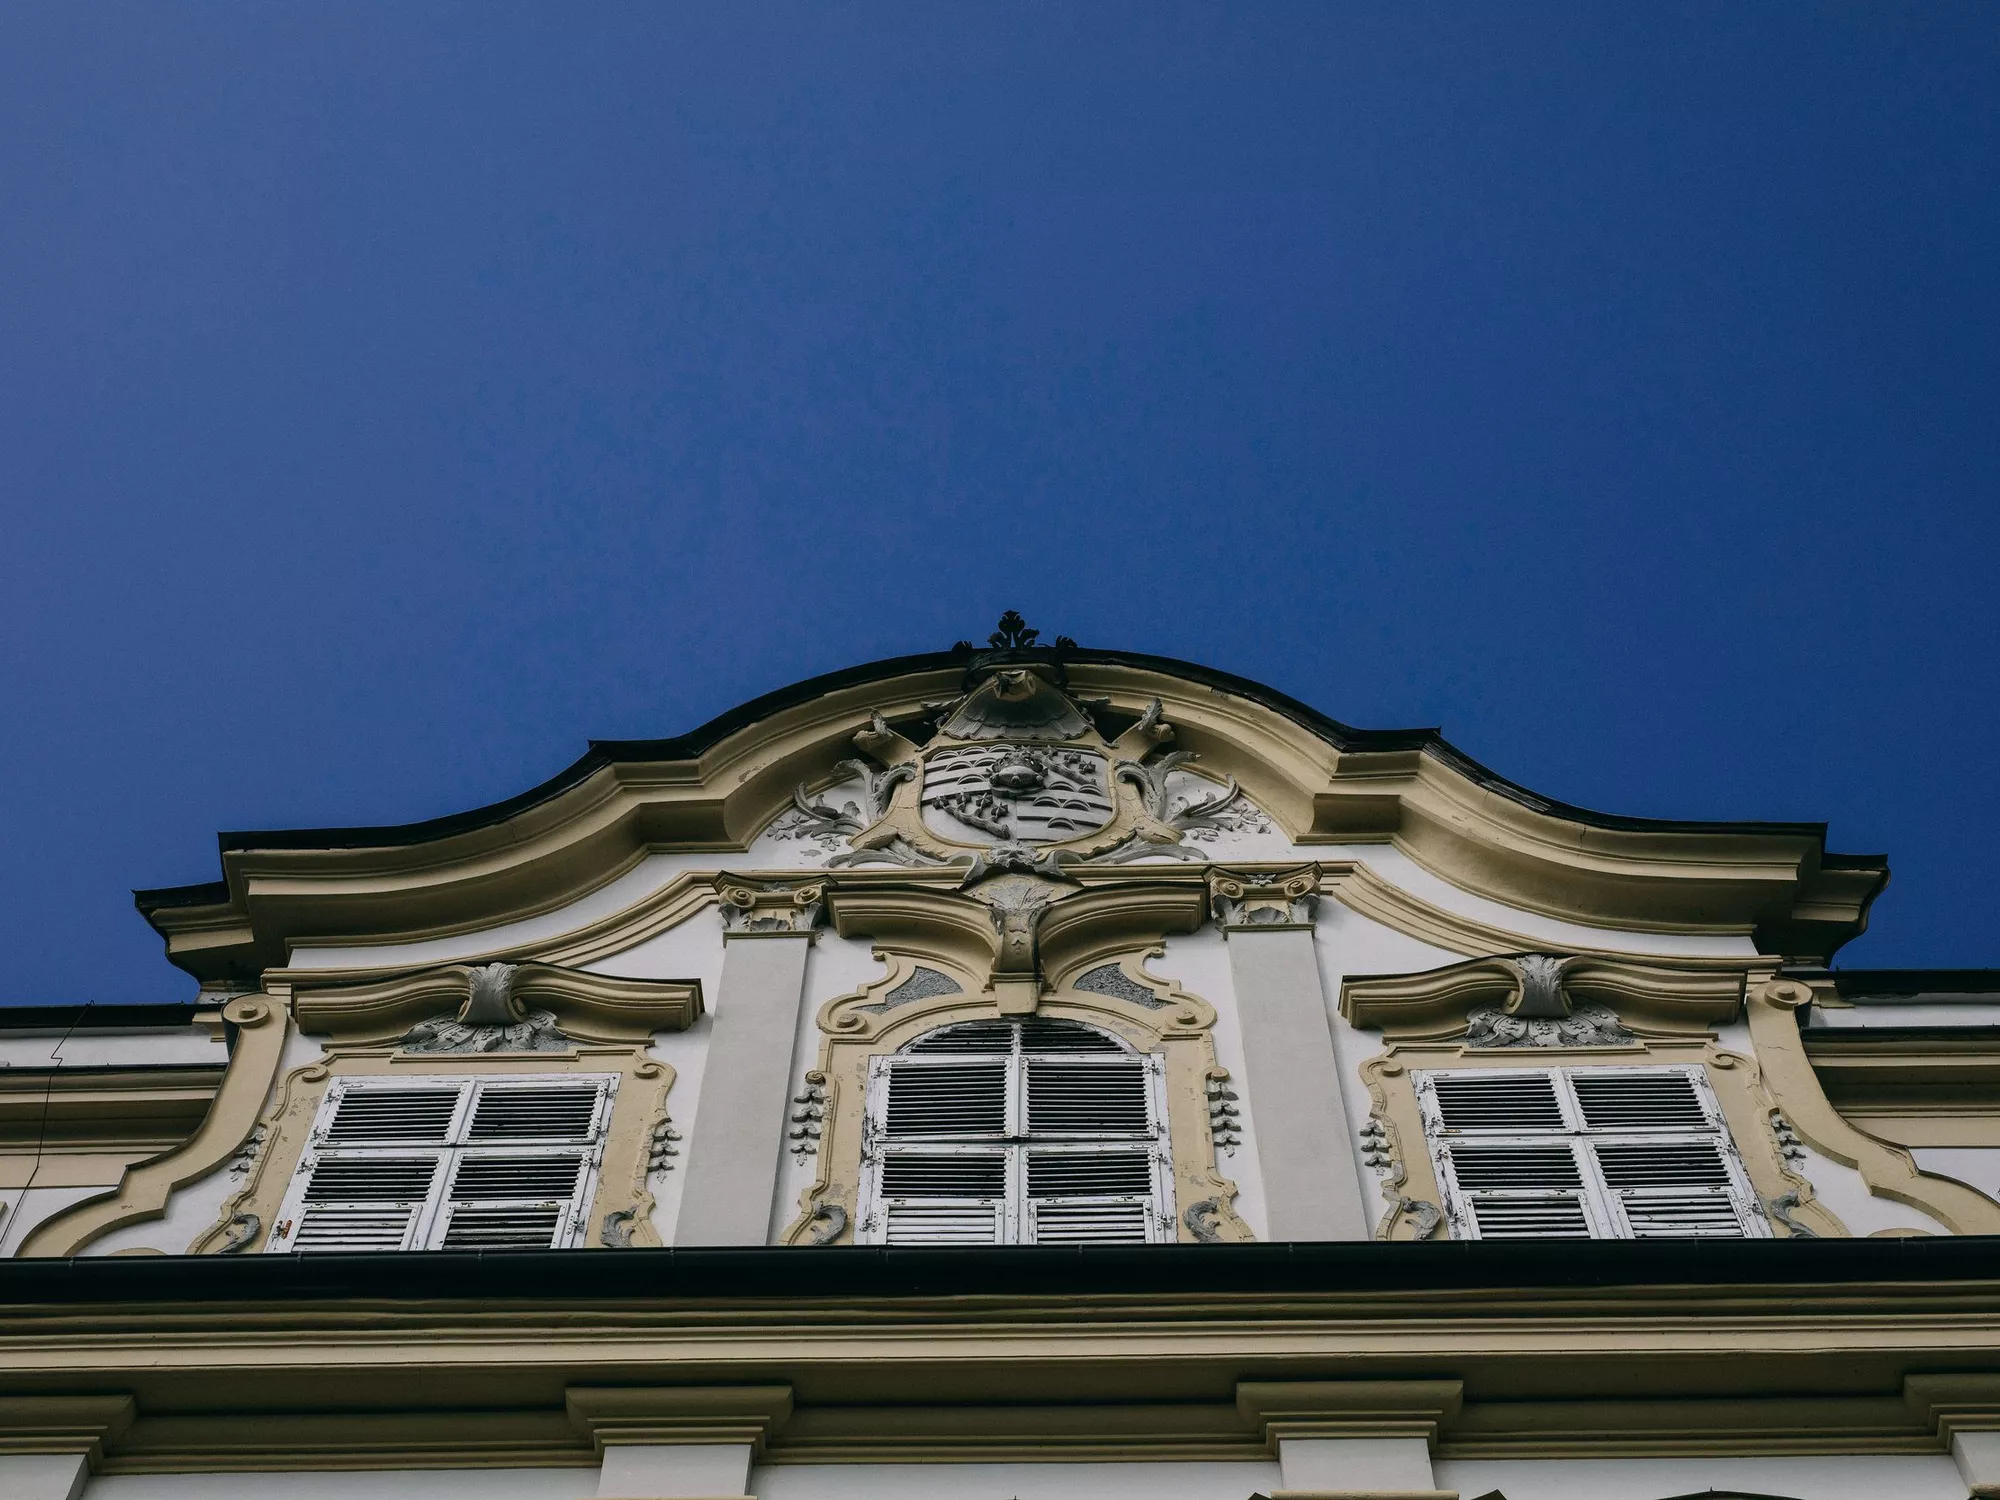 Closeup photo of the gable of Schloss Leopoldskron in Salzburg, photographed from below against the sky (c) Schlosshotels & Herrenhäuser